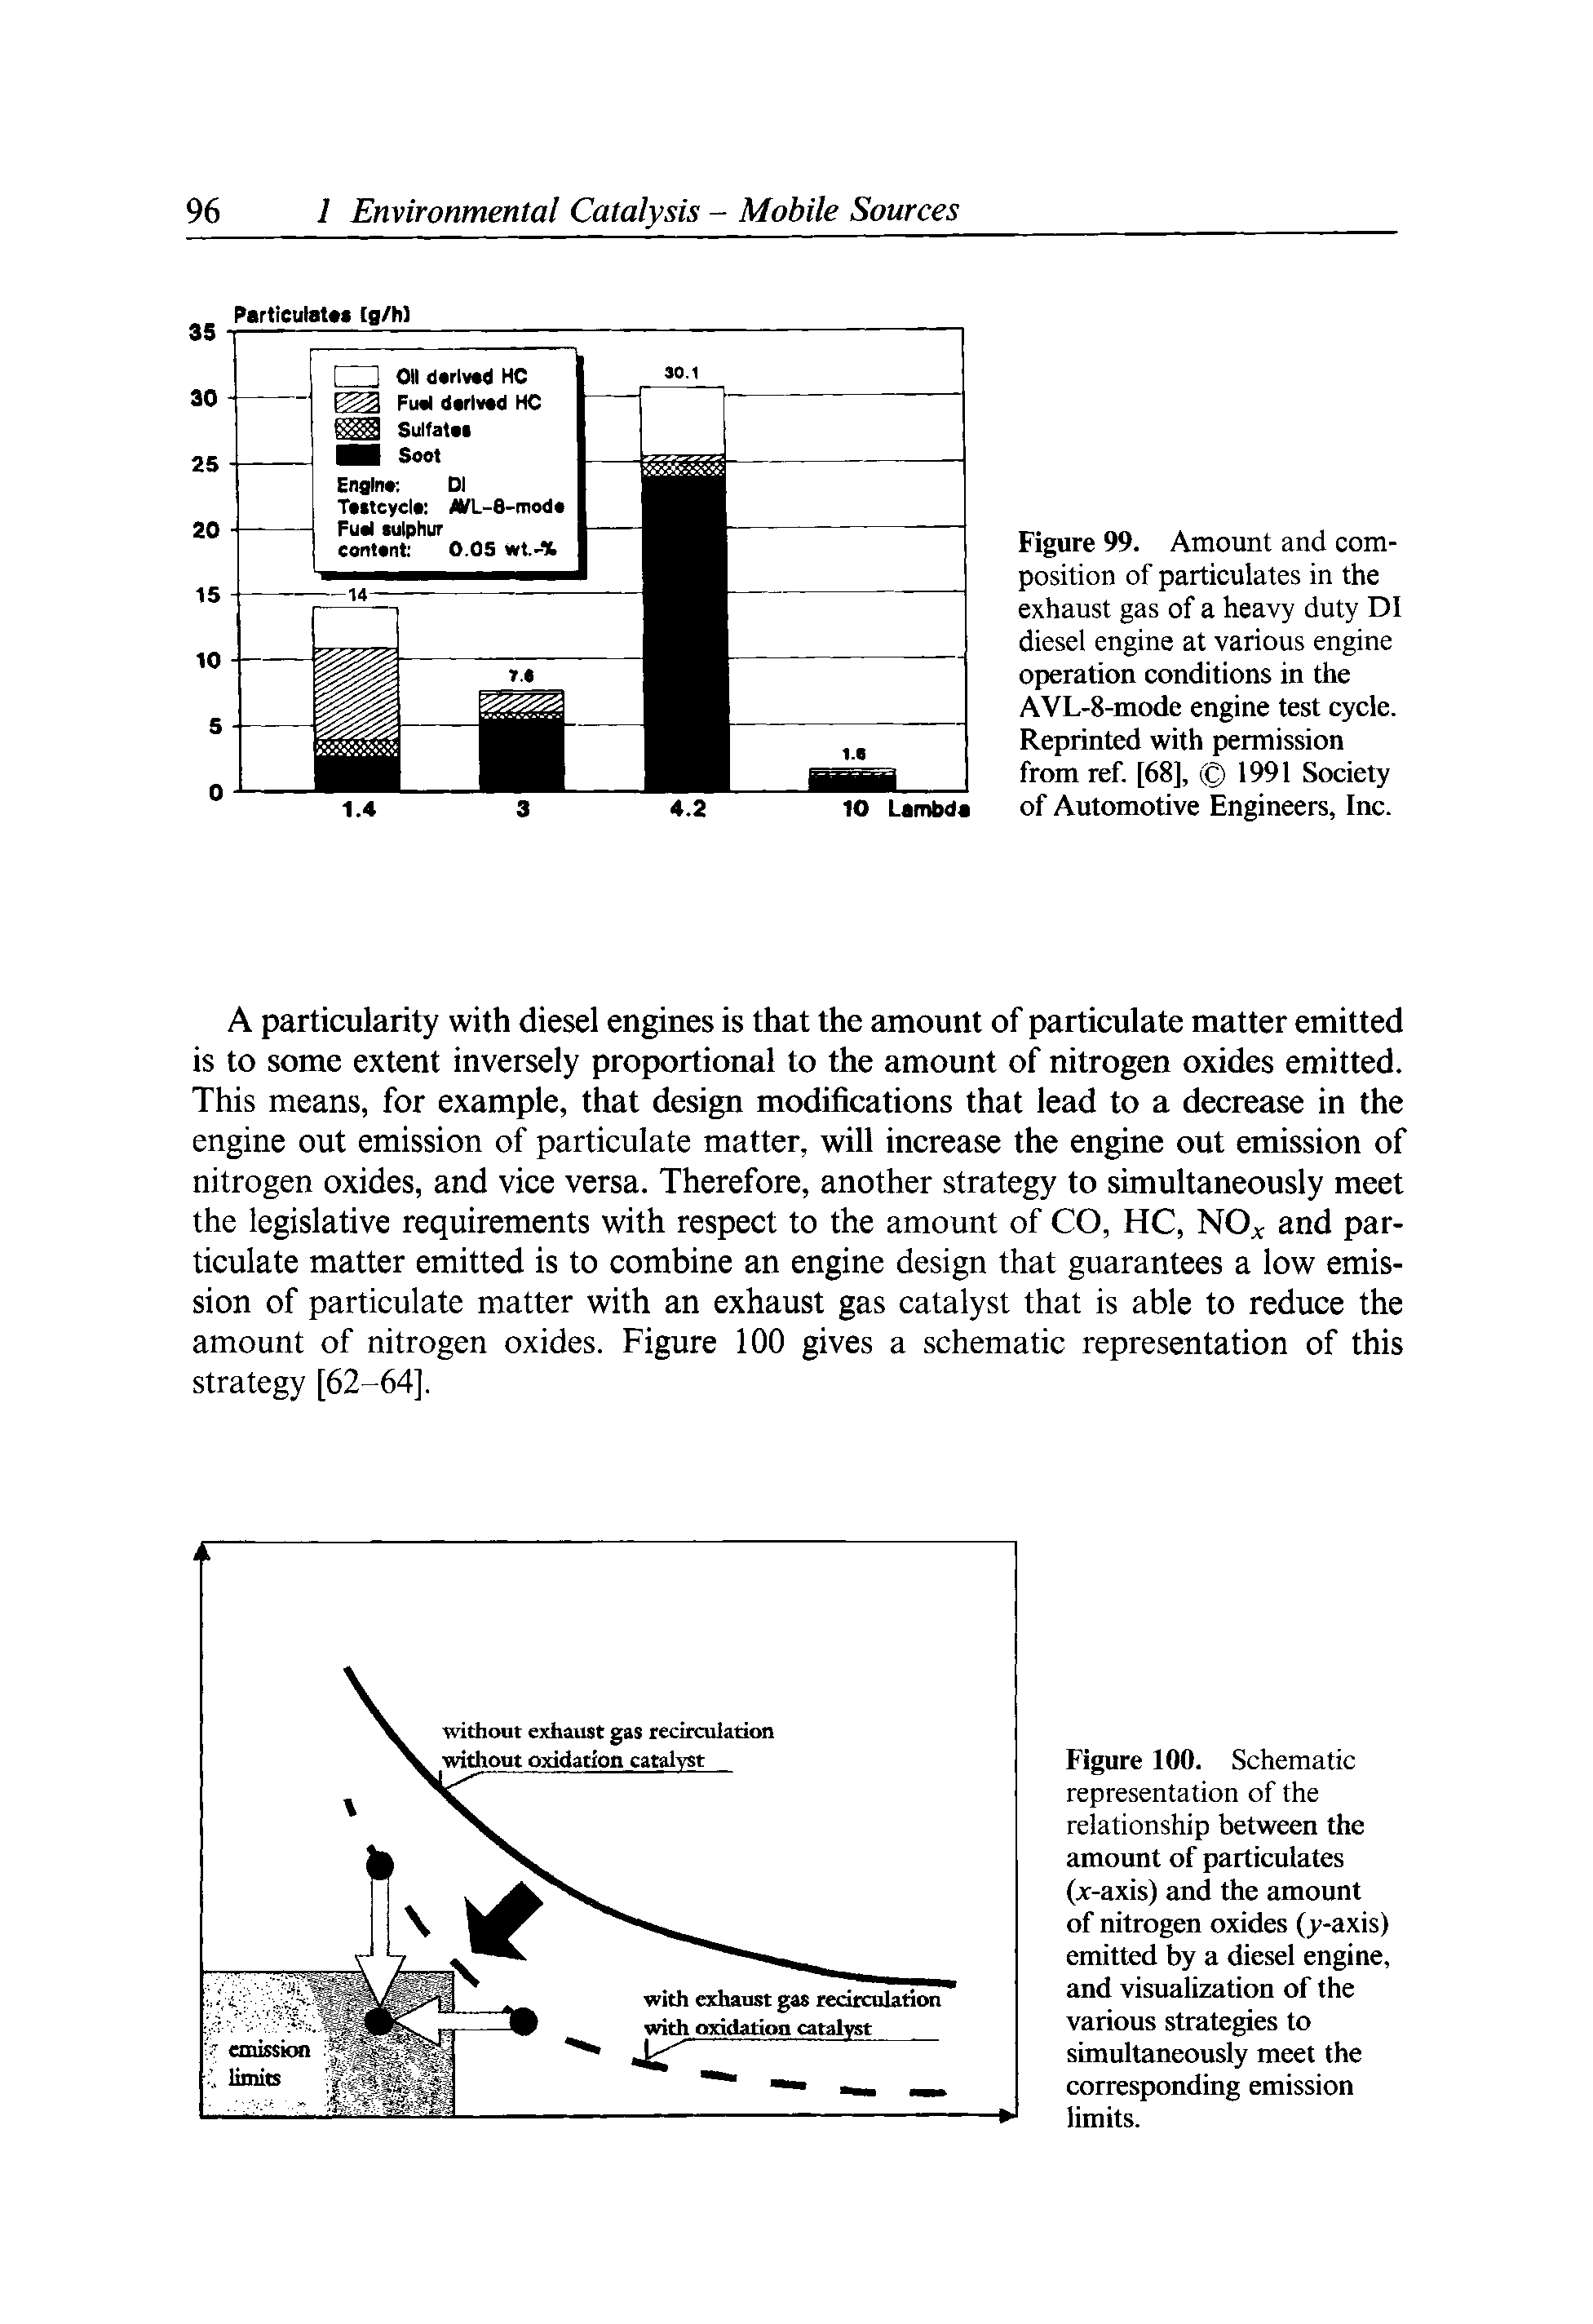 Figure 99. Amount and composition of particulates in the exhaust gas of a heavy duty DI diesel engine at various engine operation conditions in the AVL-8-mode engine test cycle. Reprinted with permission from ref [68], 1991 Society of Automotive Engineers, Inc.